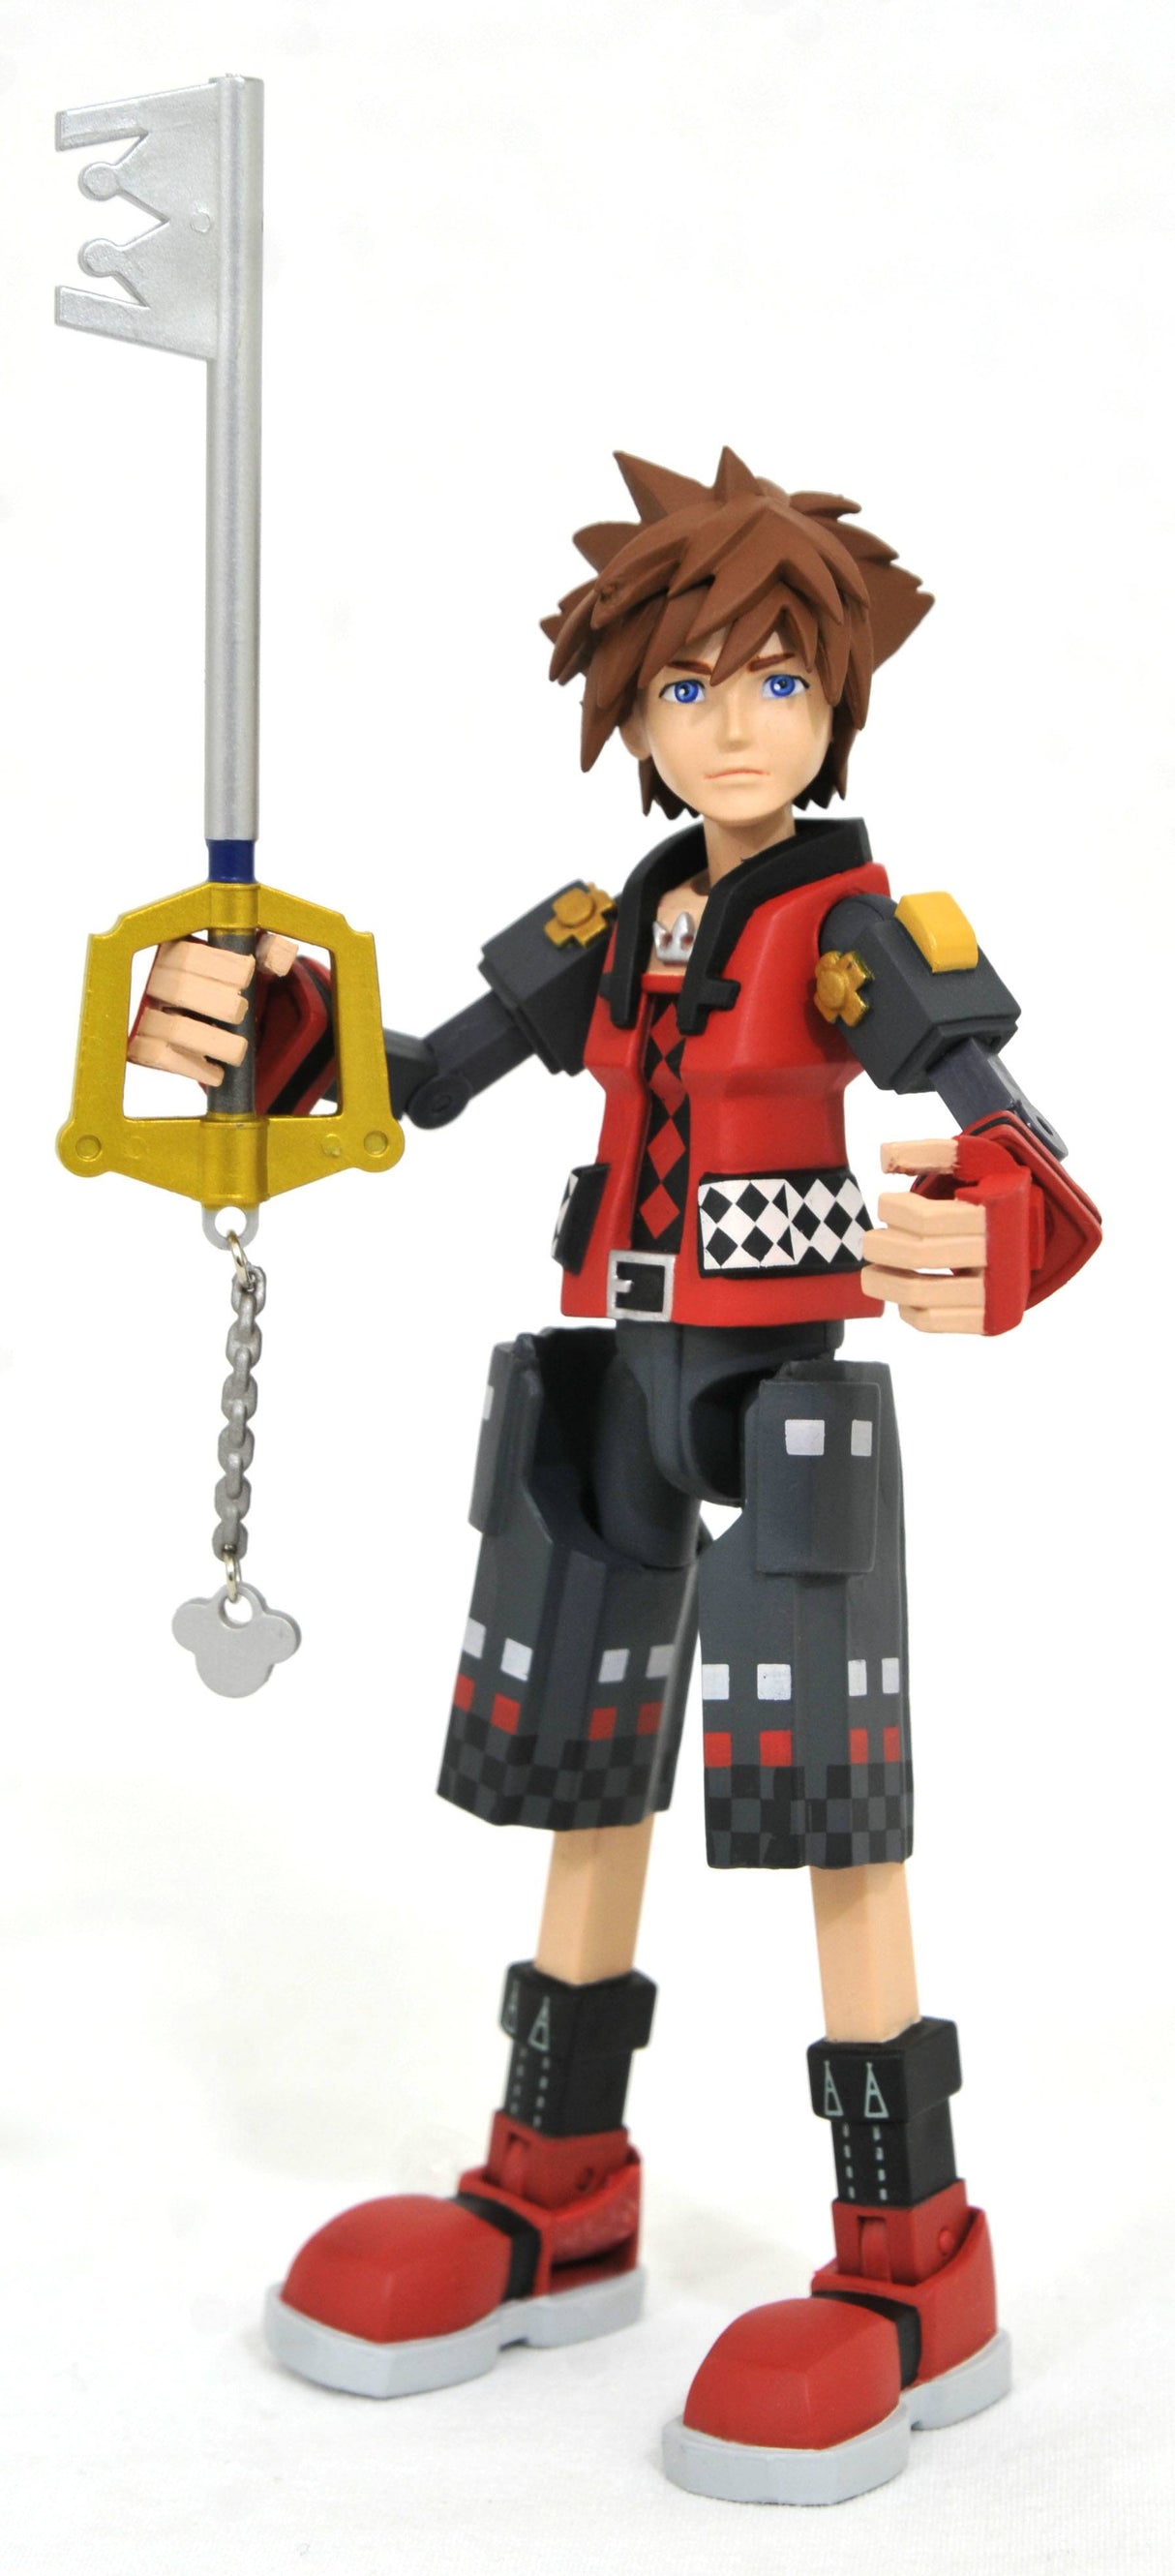 Kingdom Hearts iii Valor Form Sora from Toy Story Action Figure